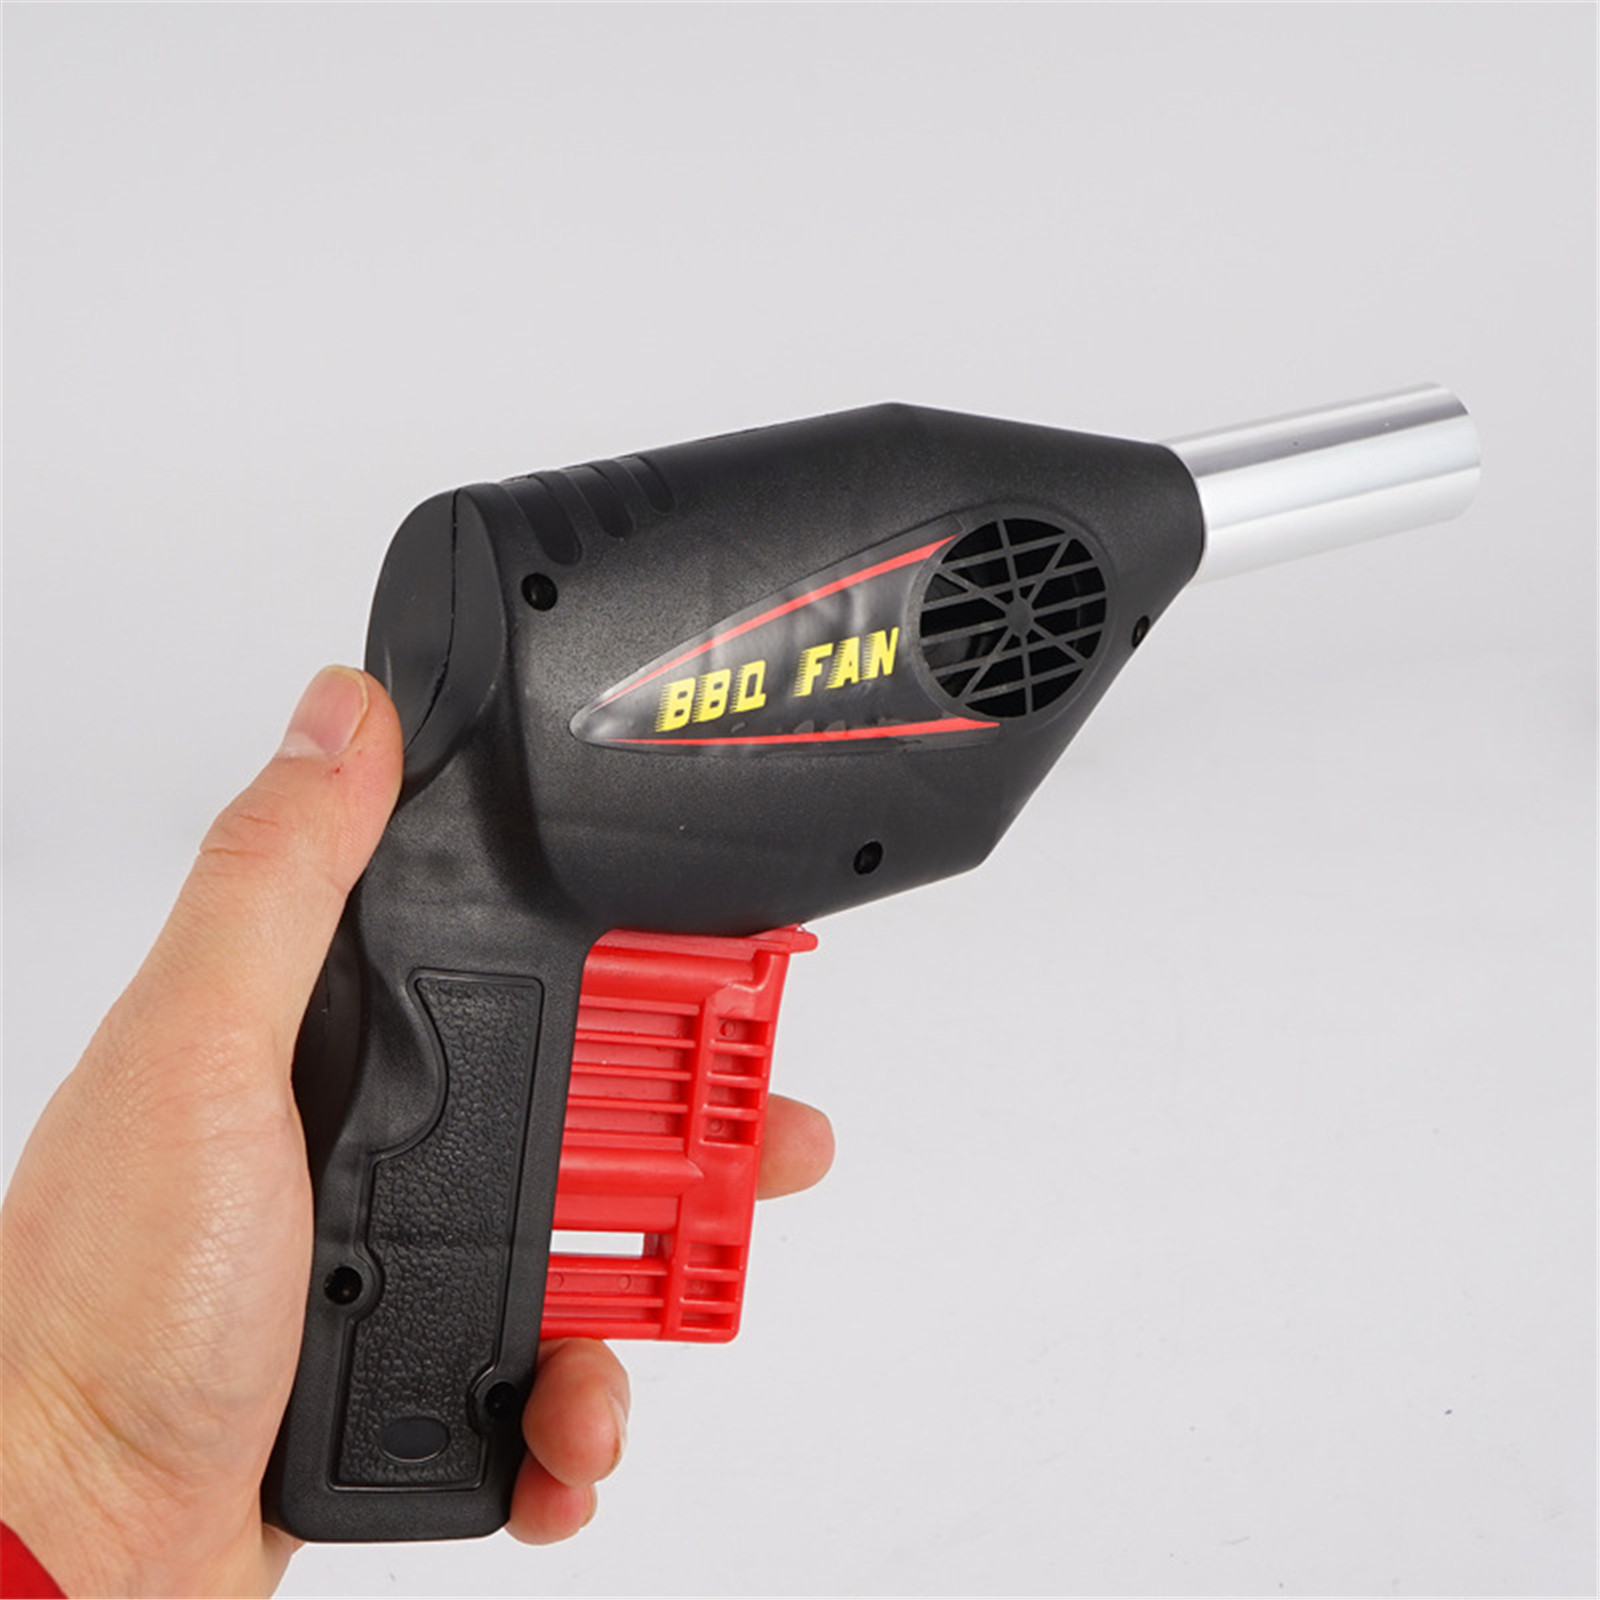 Barbecue Air Blower Bbq Hand Fan Bbq Grill Charcoal Fire Booster Outdoor Cooking Bbq Grill Accessories Gloves Mat Apron Brush Barbecue Decor - image 5 of 8